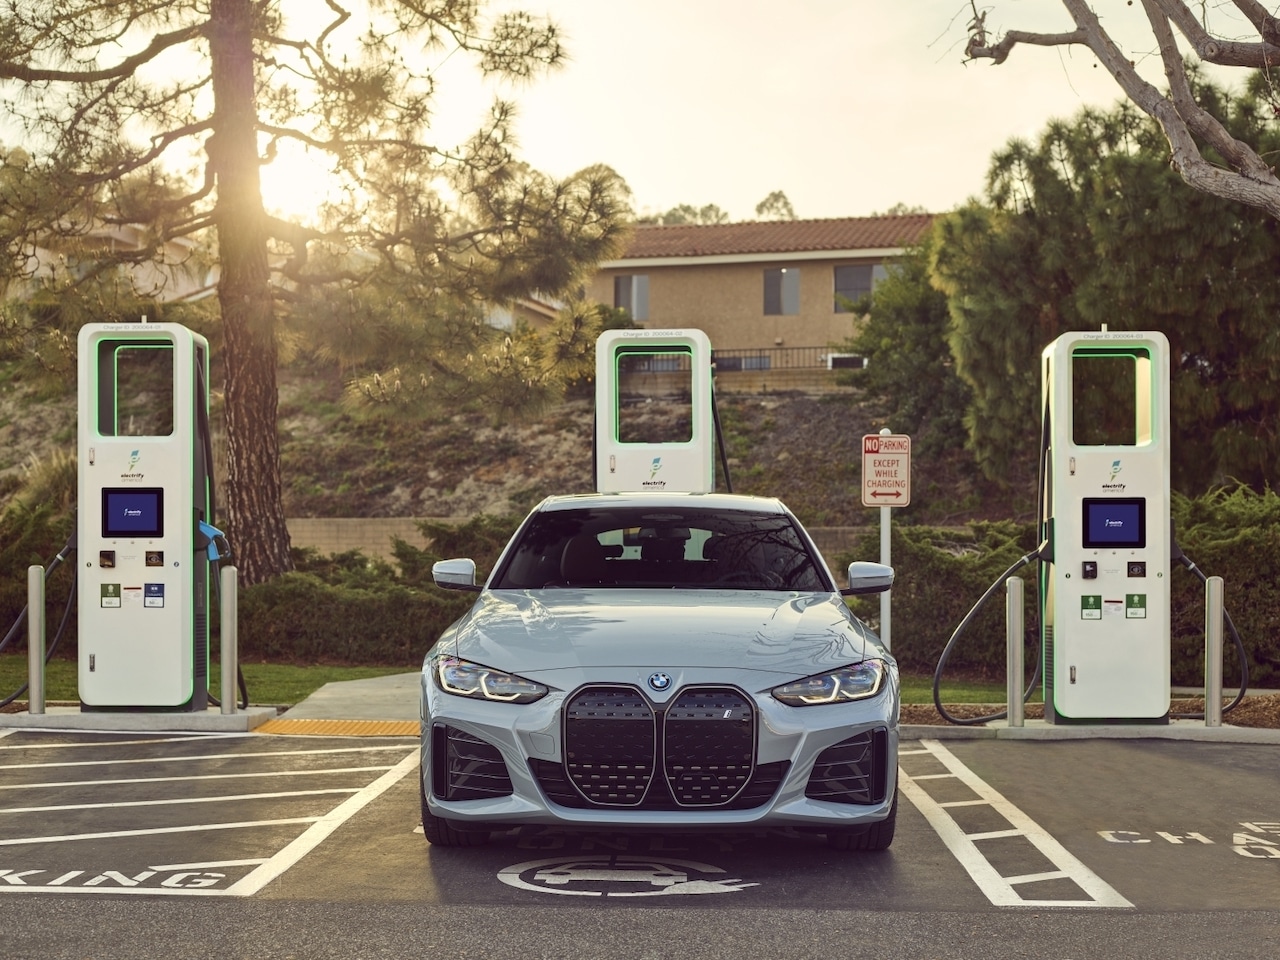 BMW of North America and Electrify America Announce Collaboration Providing Two Years Complimentary 30-minute Charging for BMW EV Customers